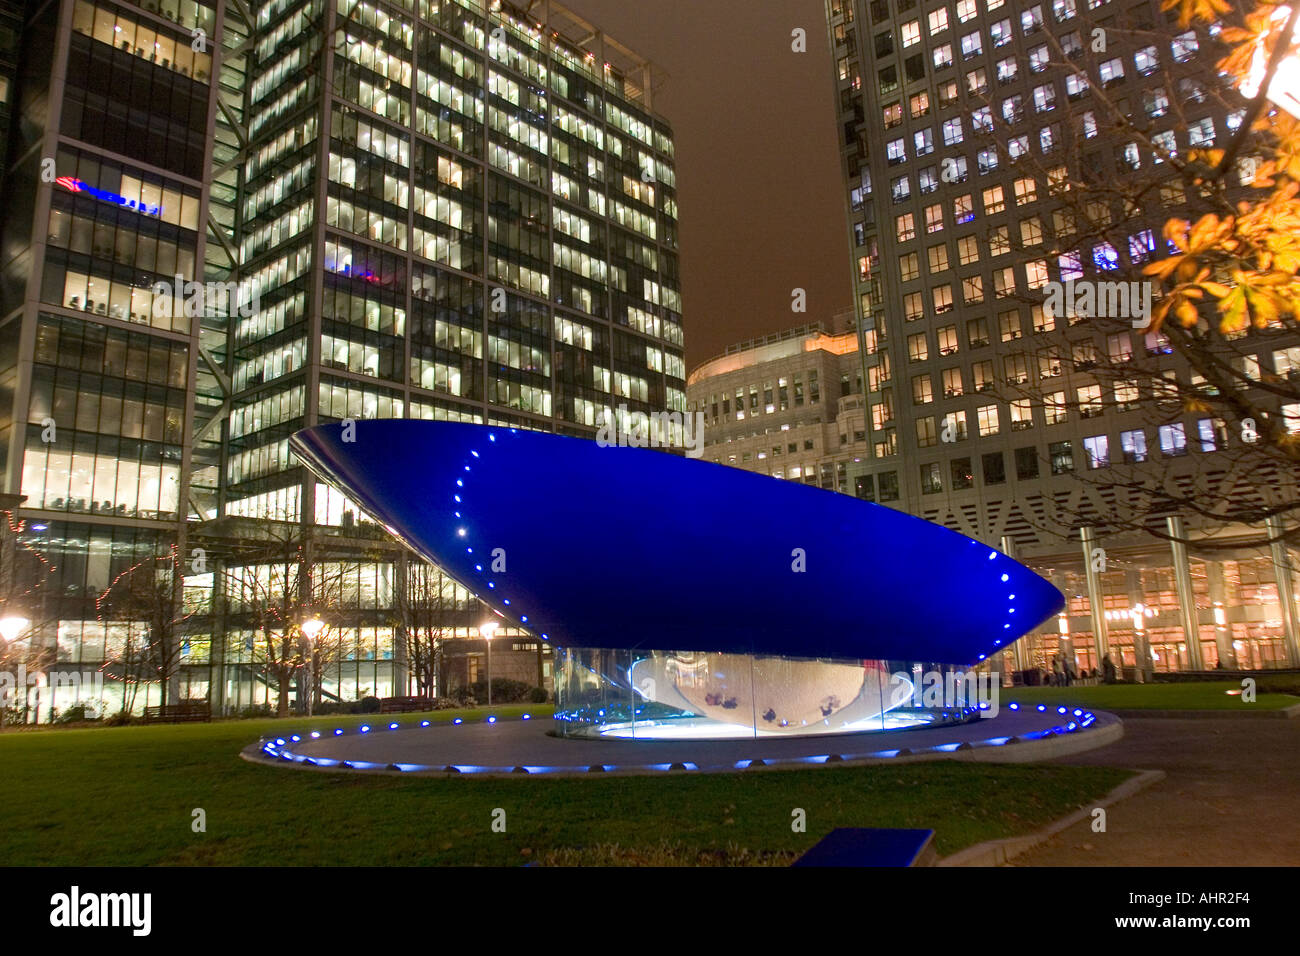 Blau-Funktion in der Nacht in Kanada Square Canary Wharf in London Stockfoto